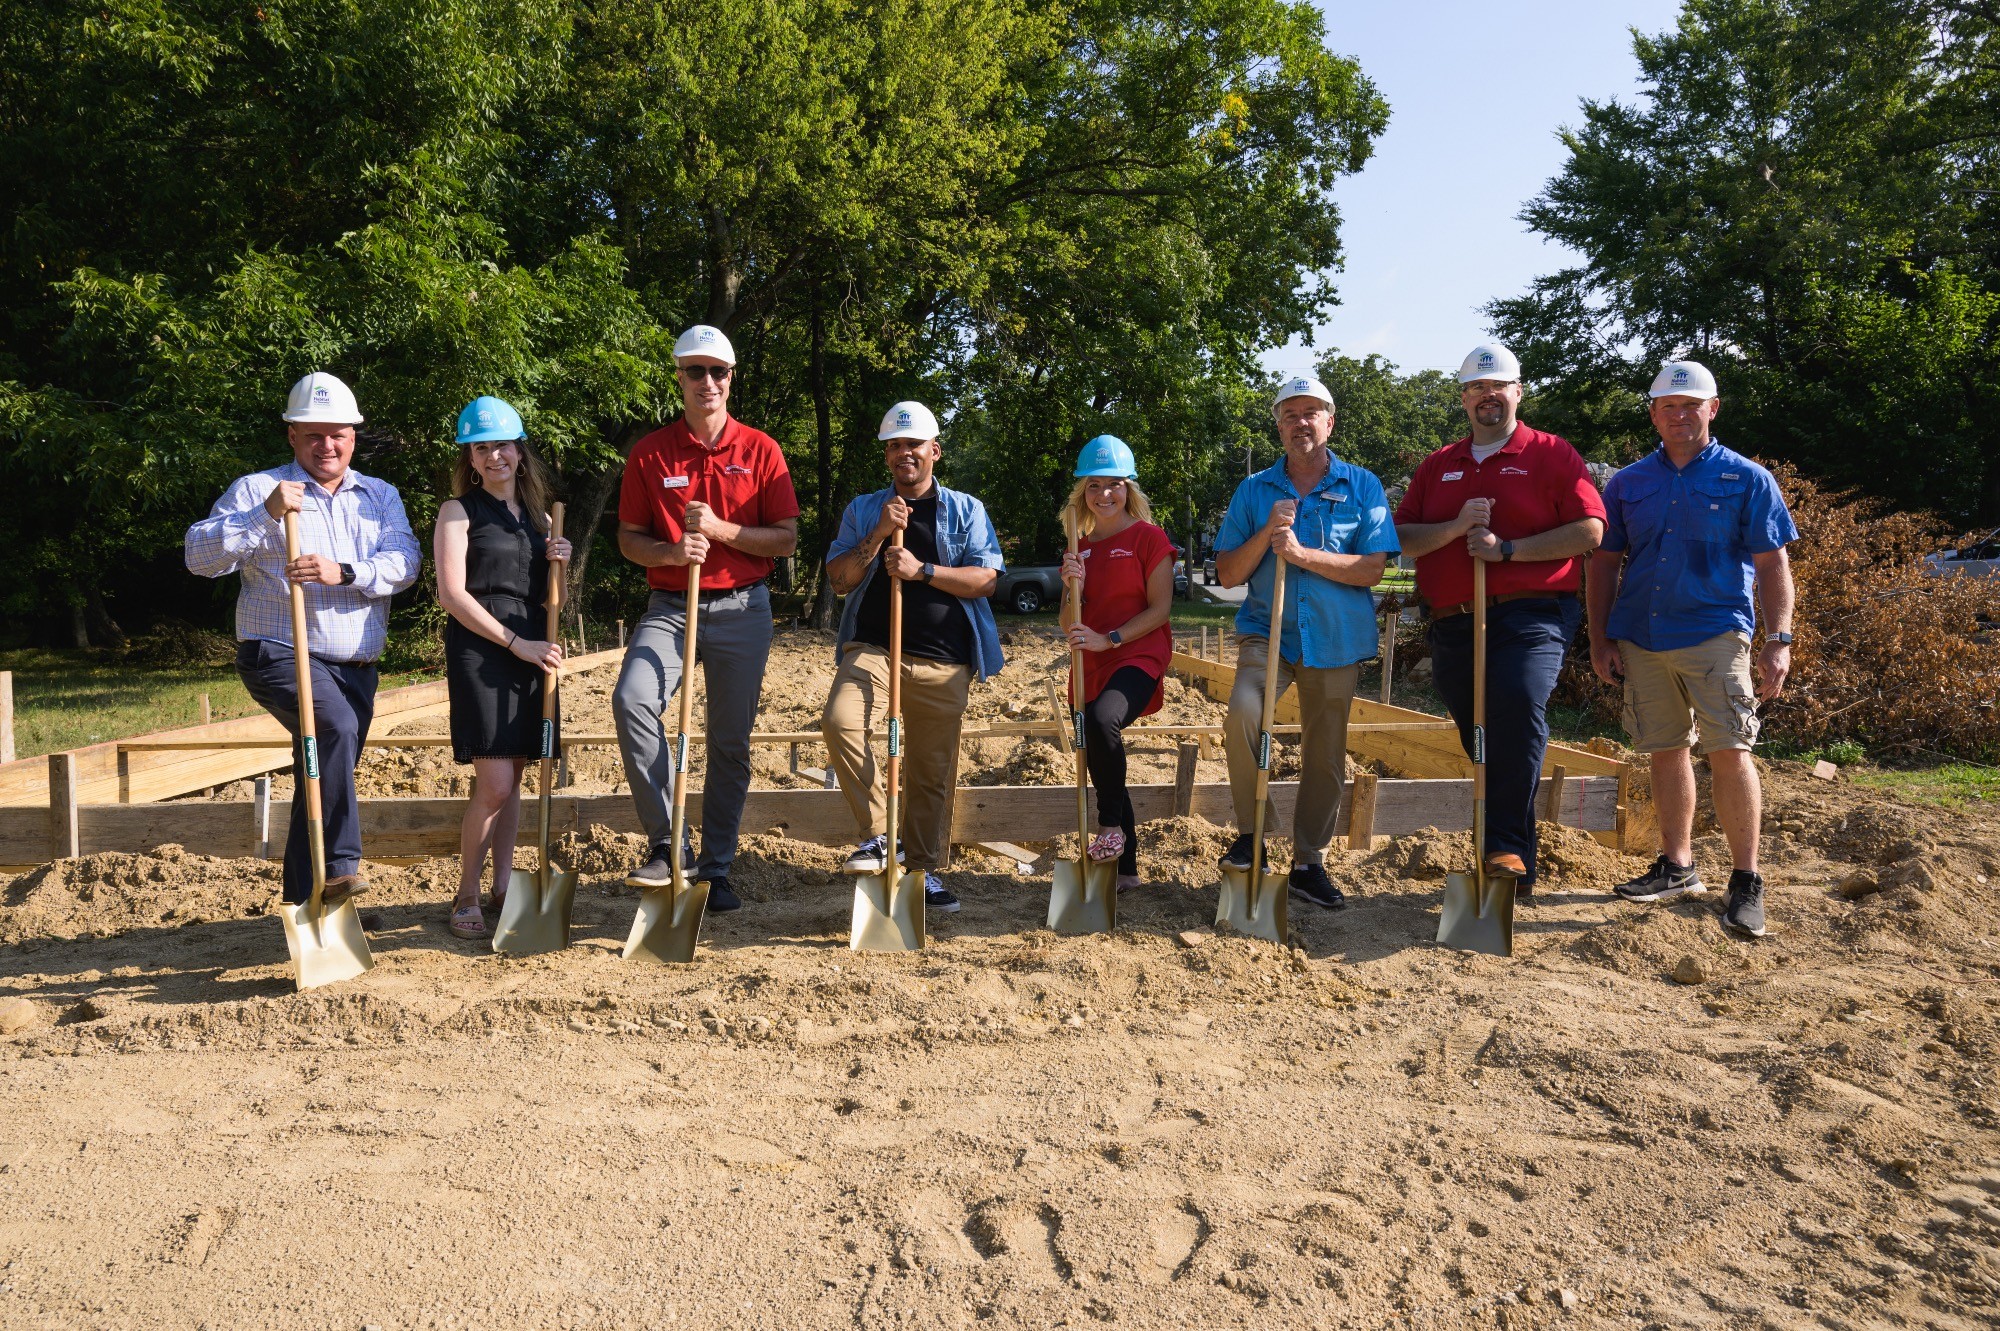 Groundbreaking Ceremony Launches Red, White & Brave Home Build | Text ORWB to 800-669-2517 to learn more!